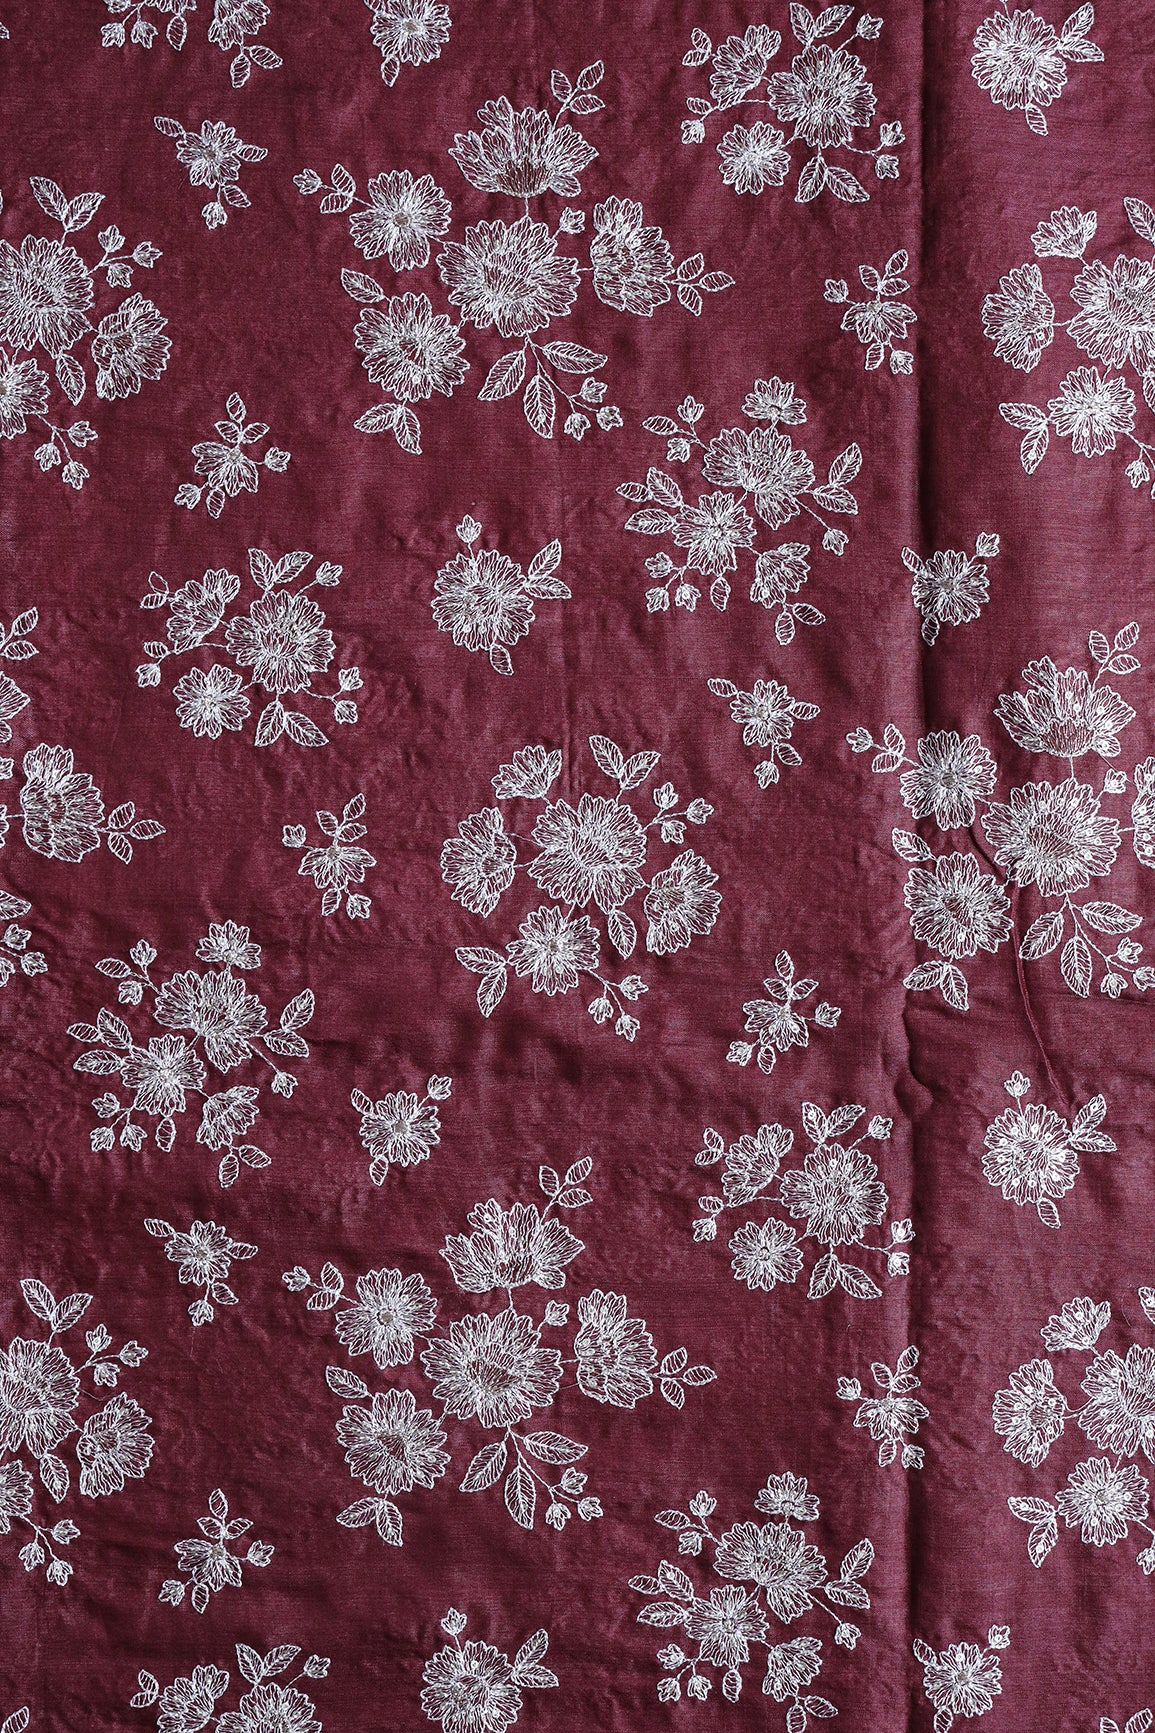 White Thread With Gold Sequins Floral Embroidery On Maroon Pure Bamboo Silk Fabric